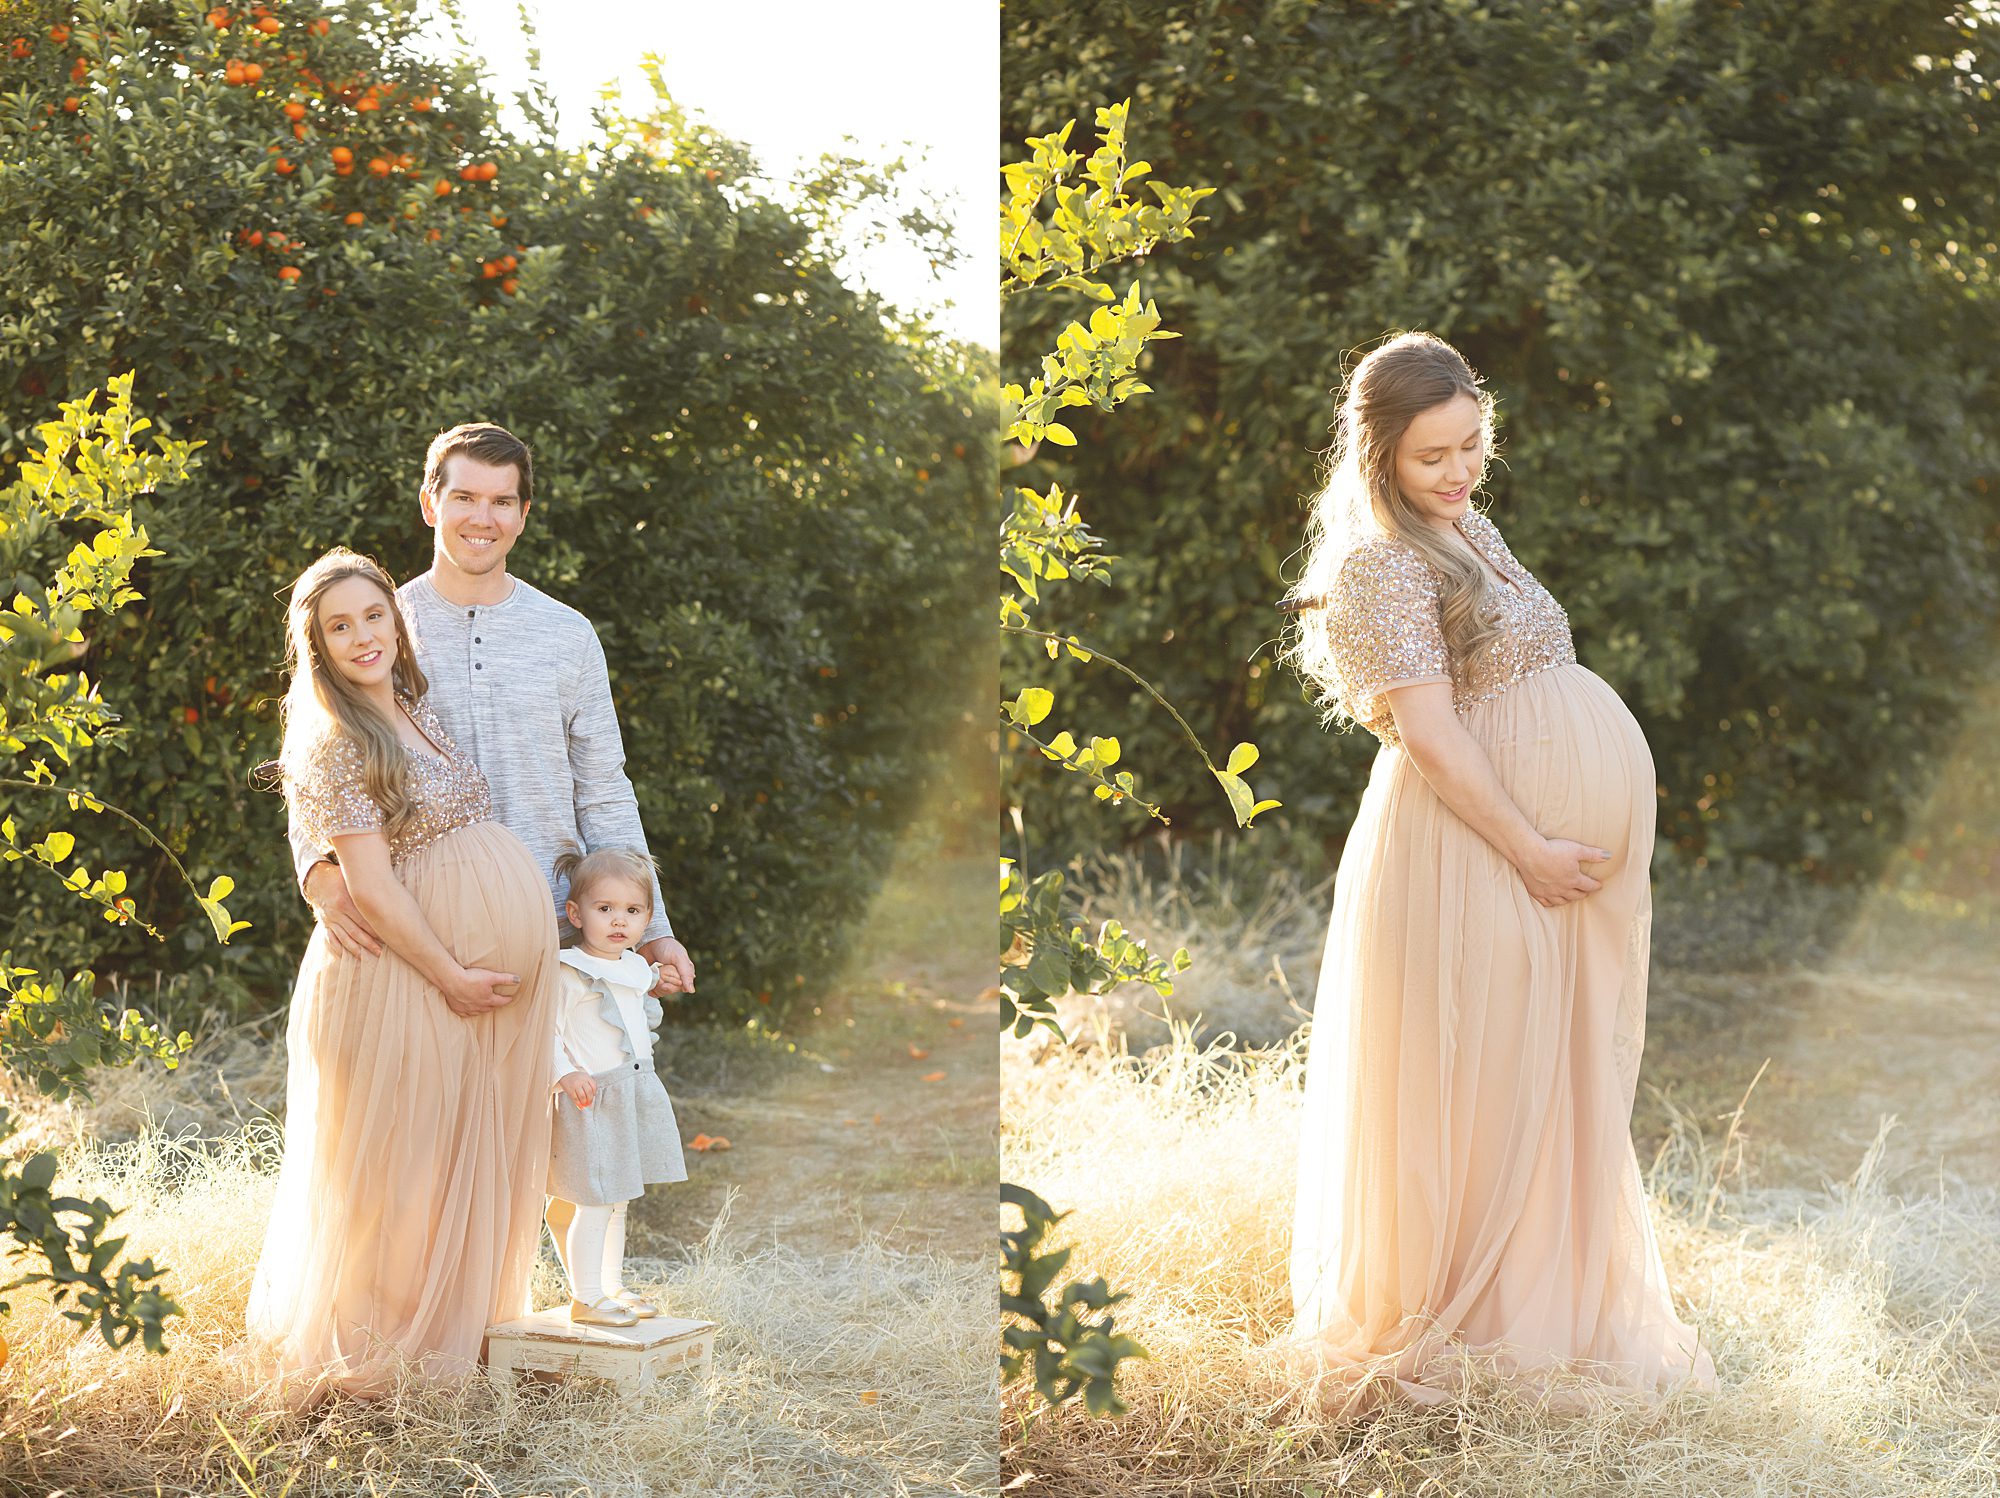 Outdoor maternity photography | Scottsdale maternity photographer | Reaj Roberts Photography